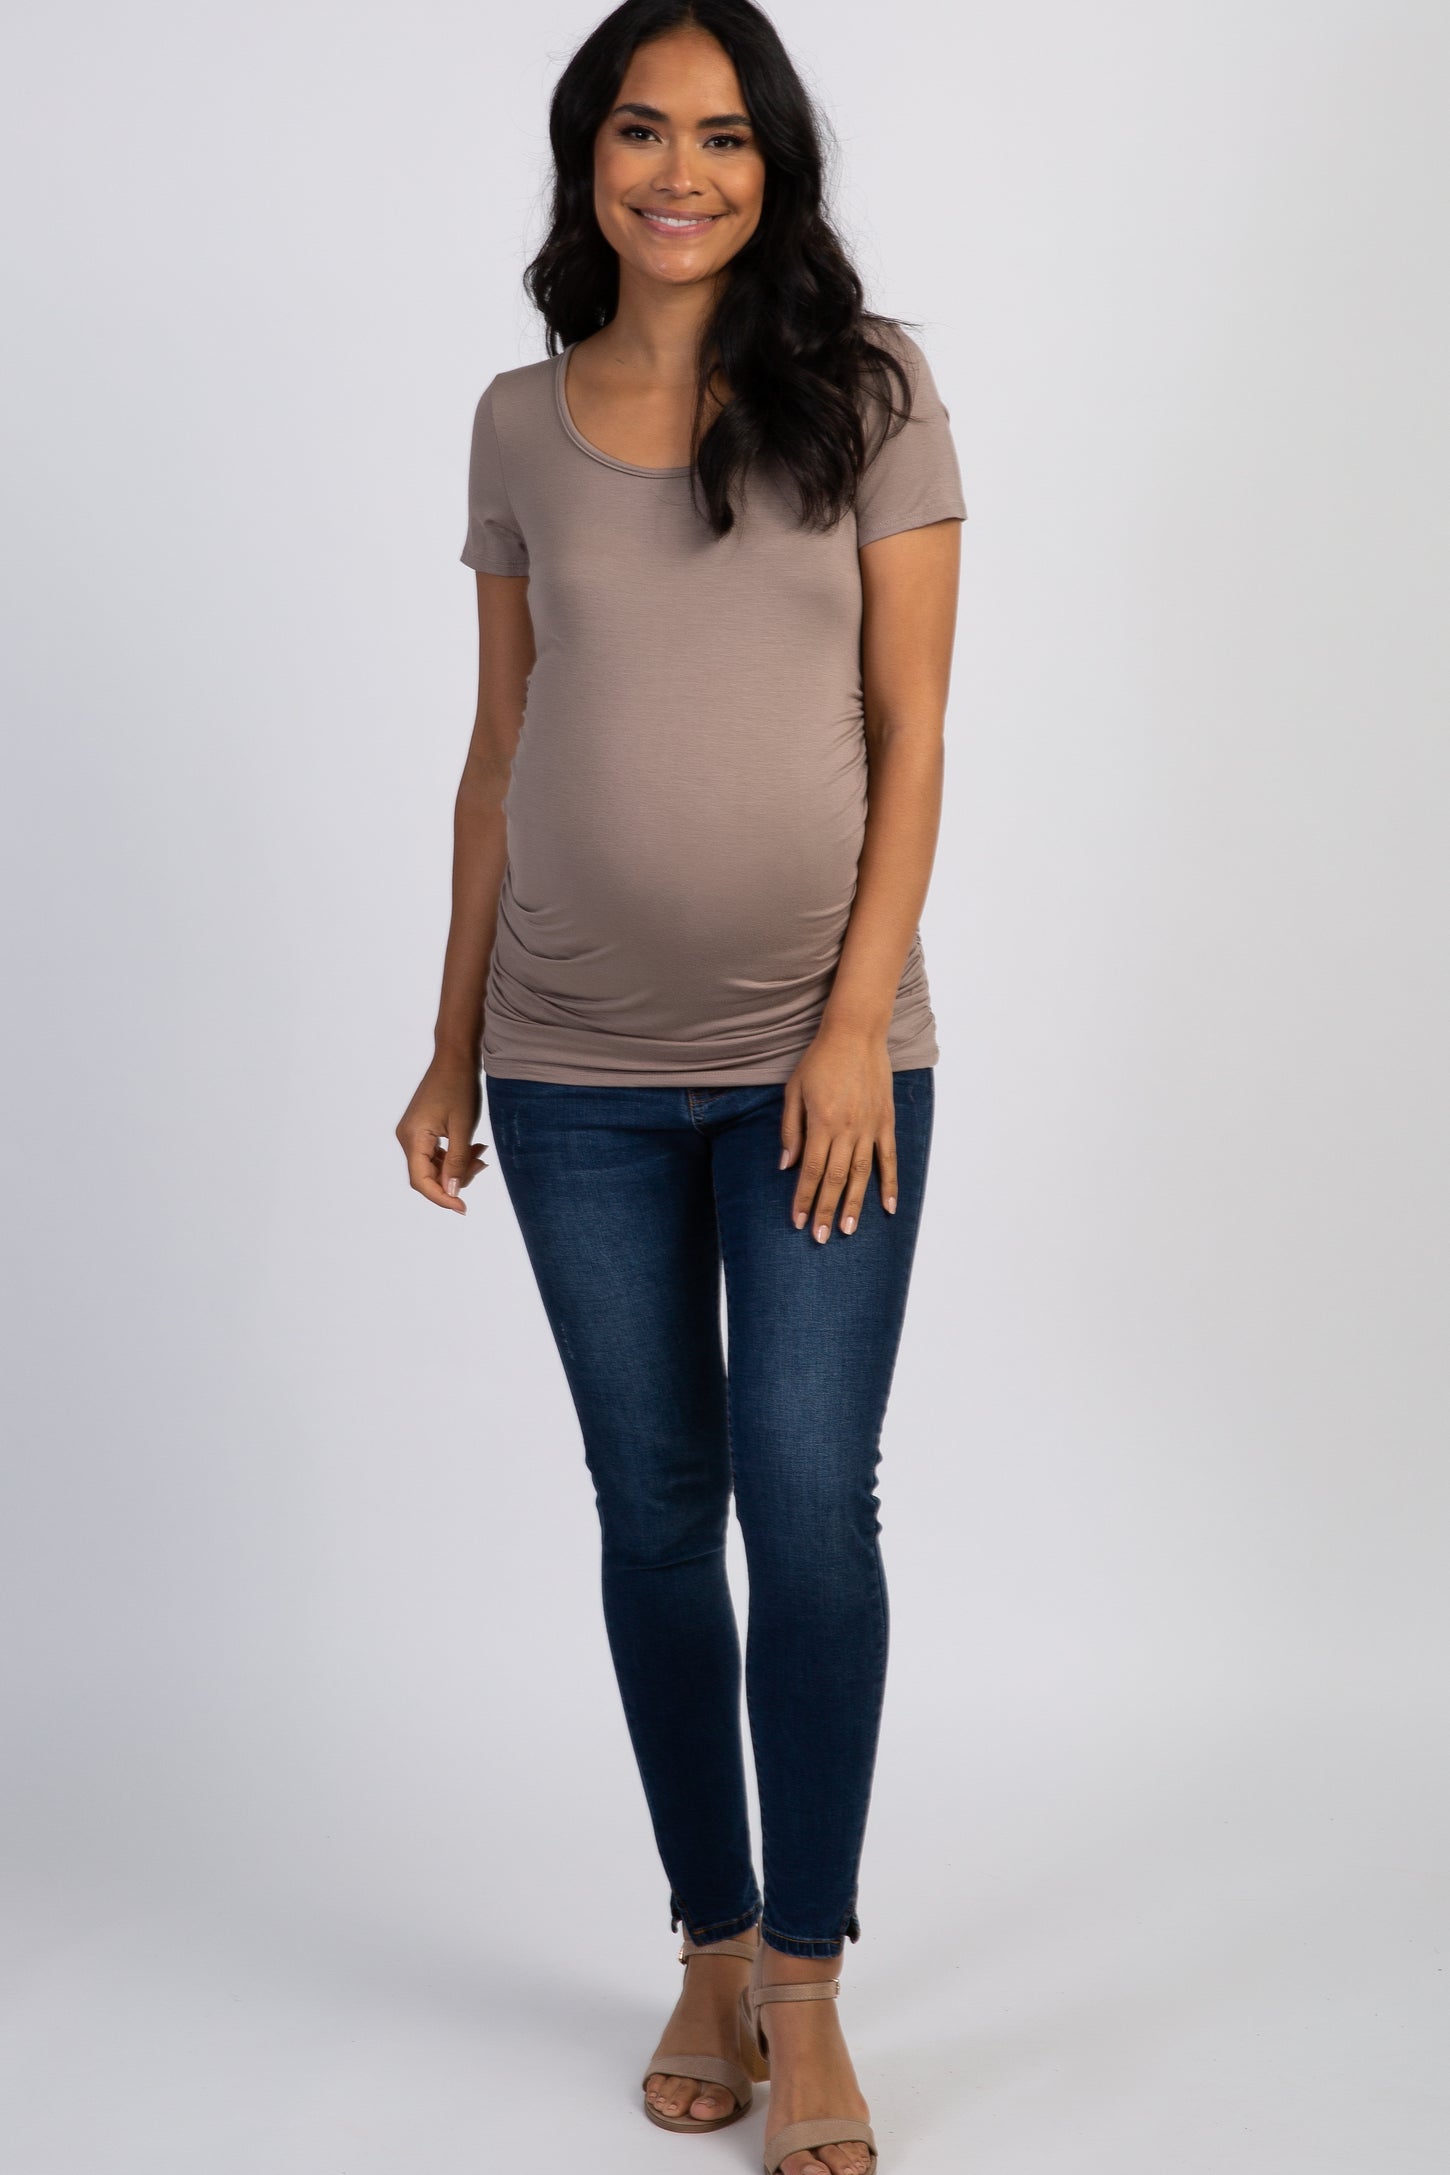 PinkBlush Taupe Basic Fitted Short Sleeve Maternity Top